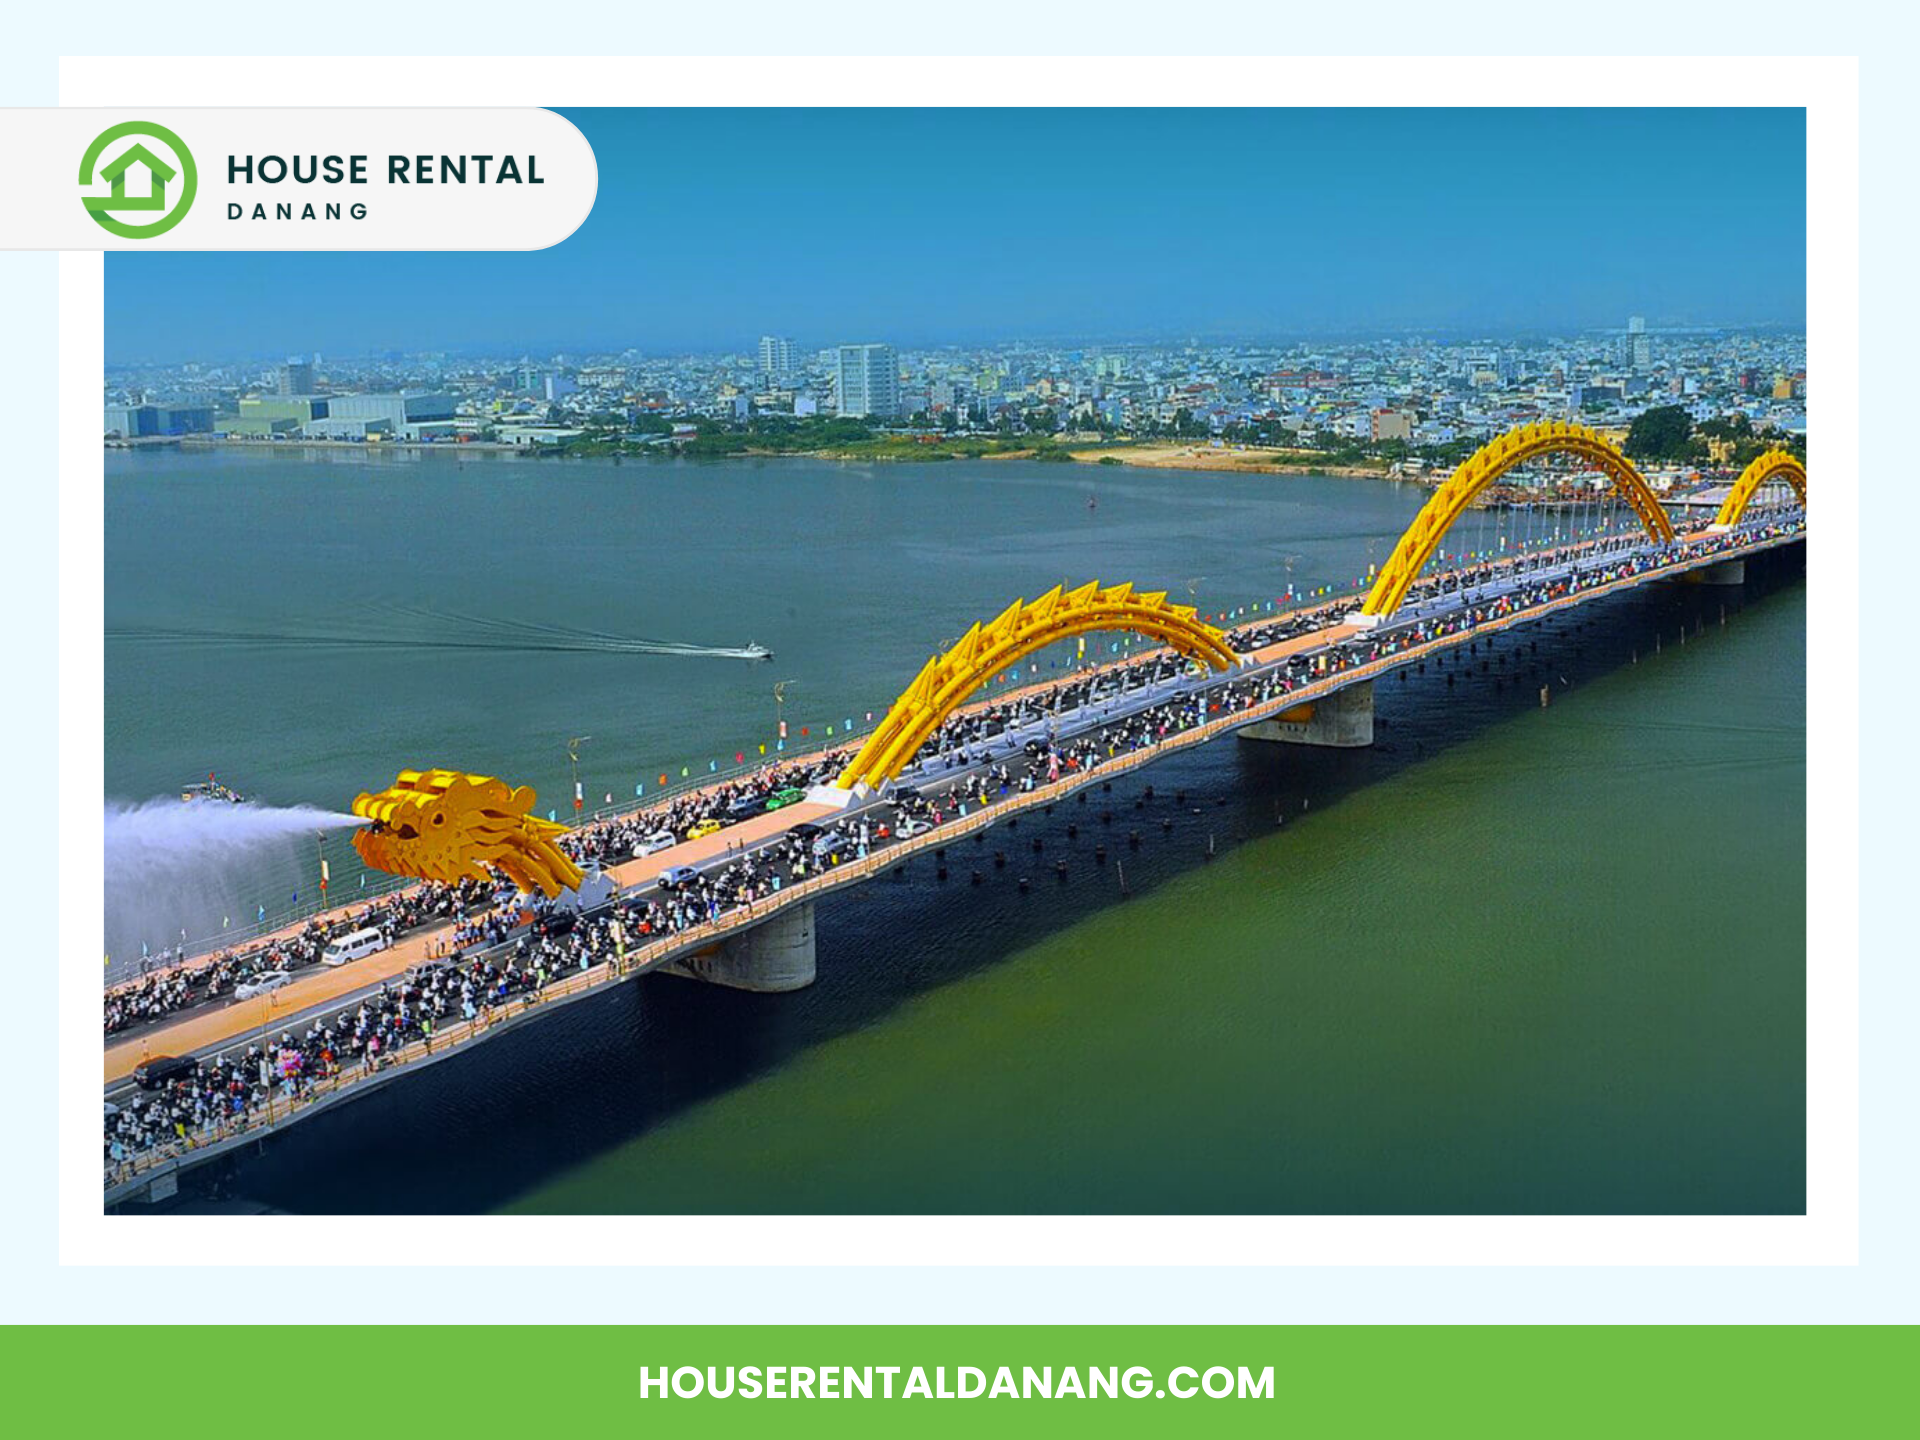 Image of a long bridge with a yellow dragon sculpture spanning across a wide river, crowded with people. In the background is a cityscape. "House Rental Danang" logo and website are visible. This iconic structure is known as Dragon Bridge in Da Nang.